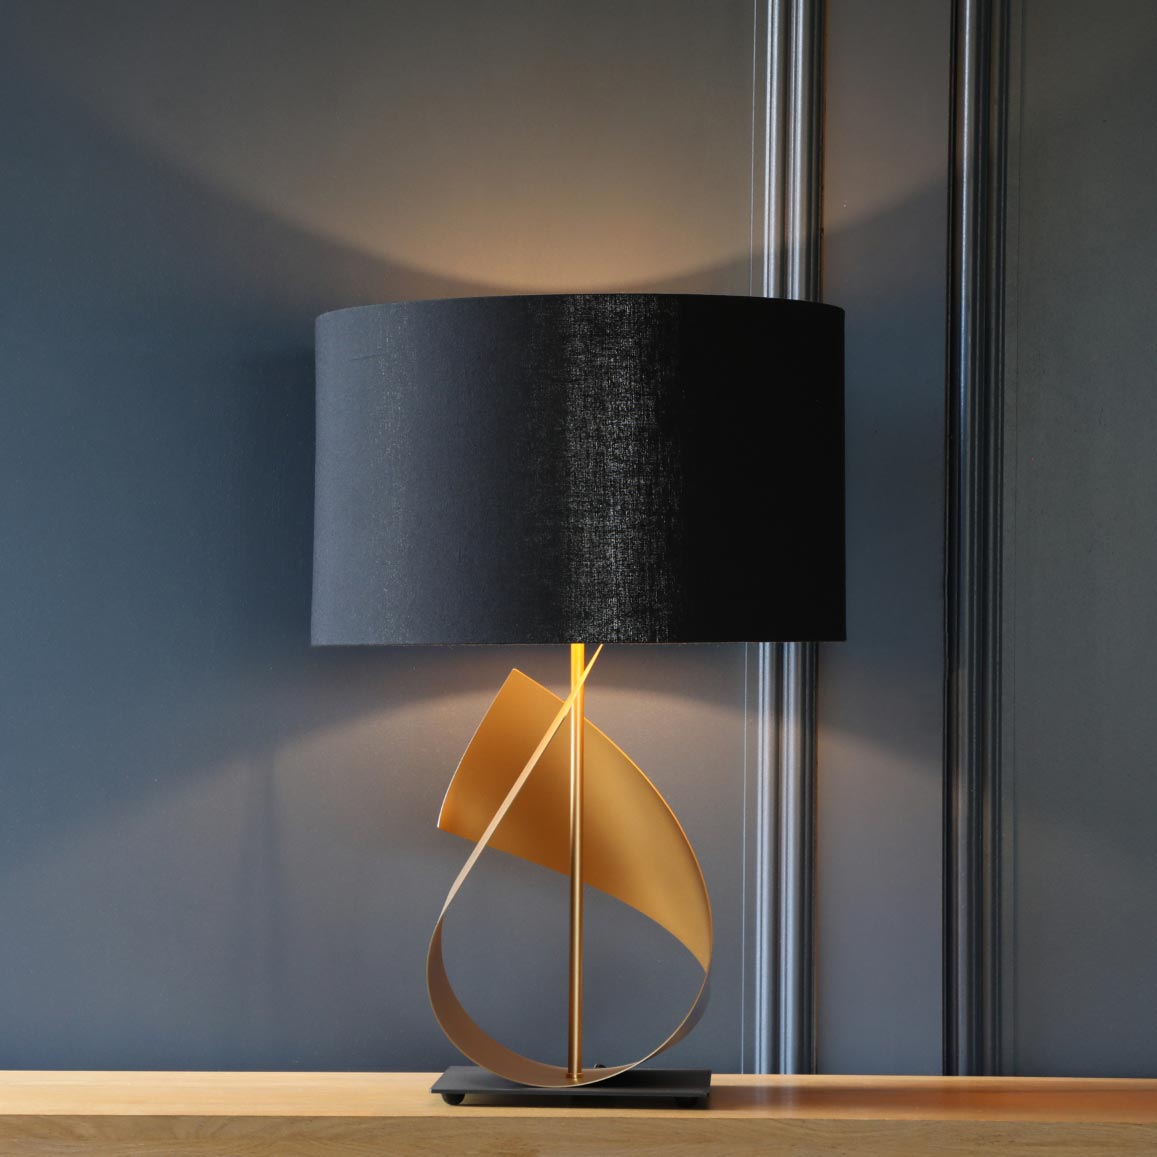 South Charlotte Supplied FLUX table lamp in gold with an optional blue shade.